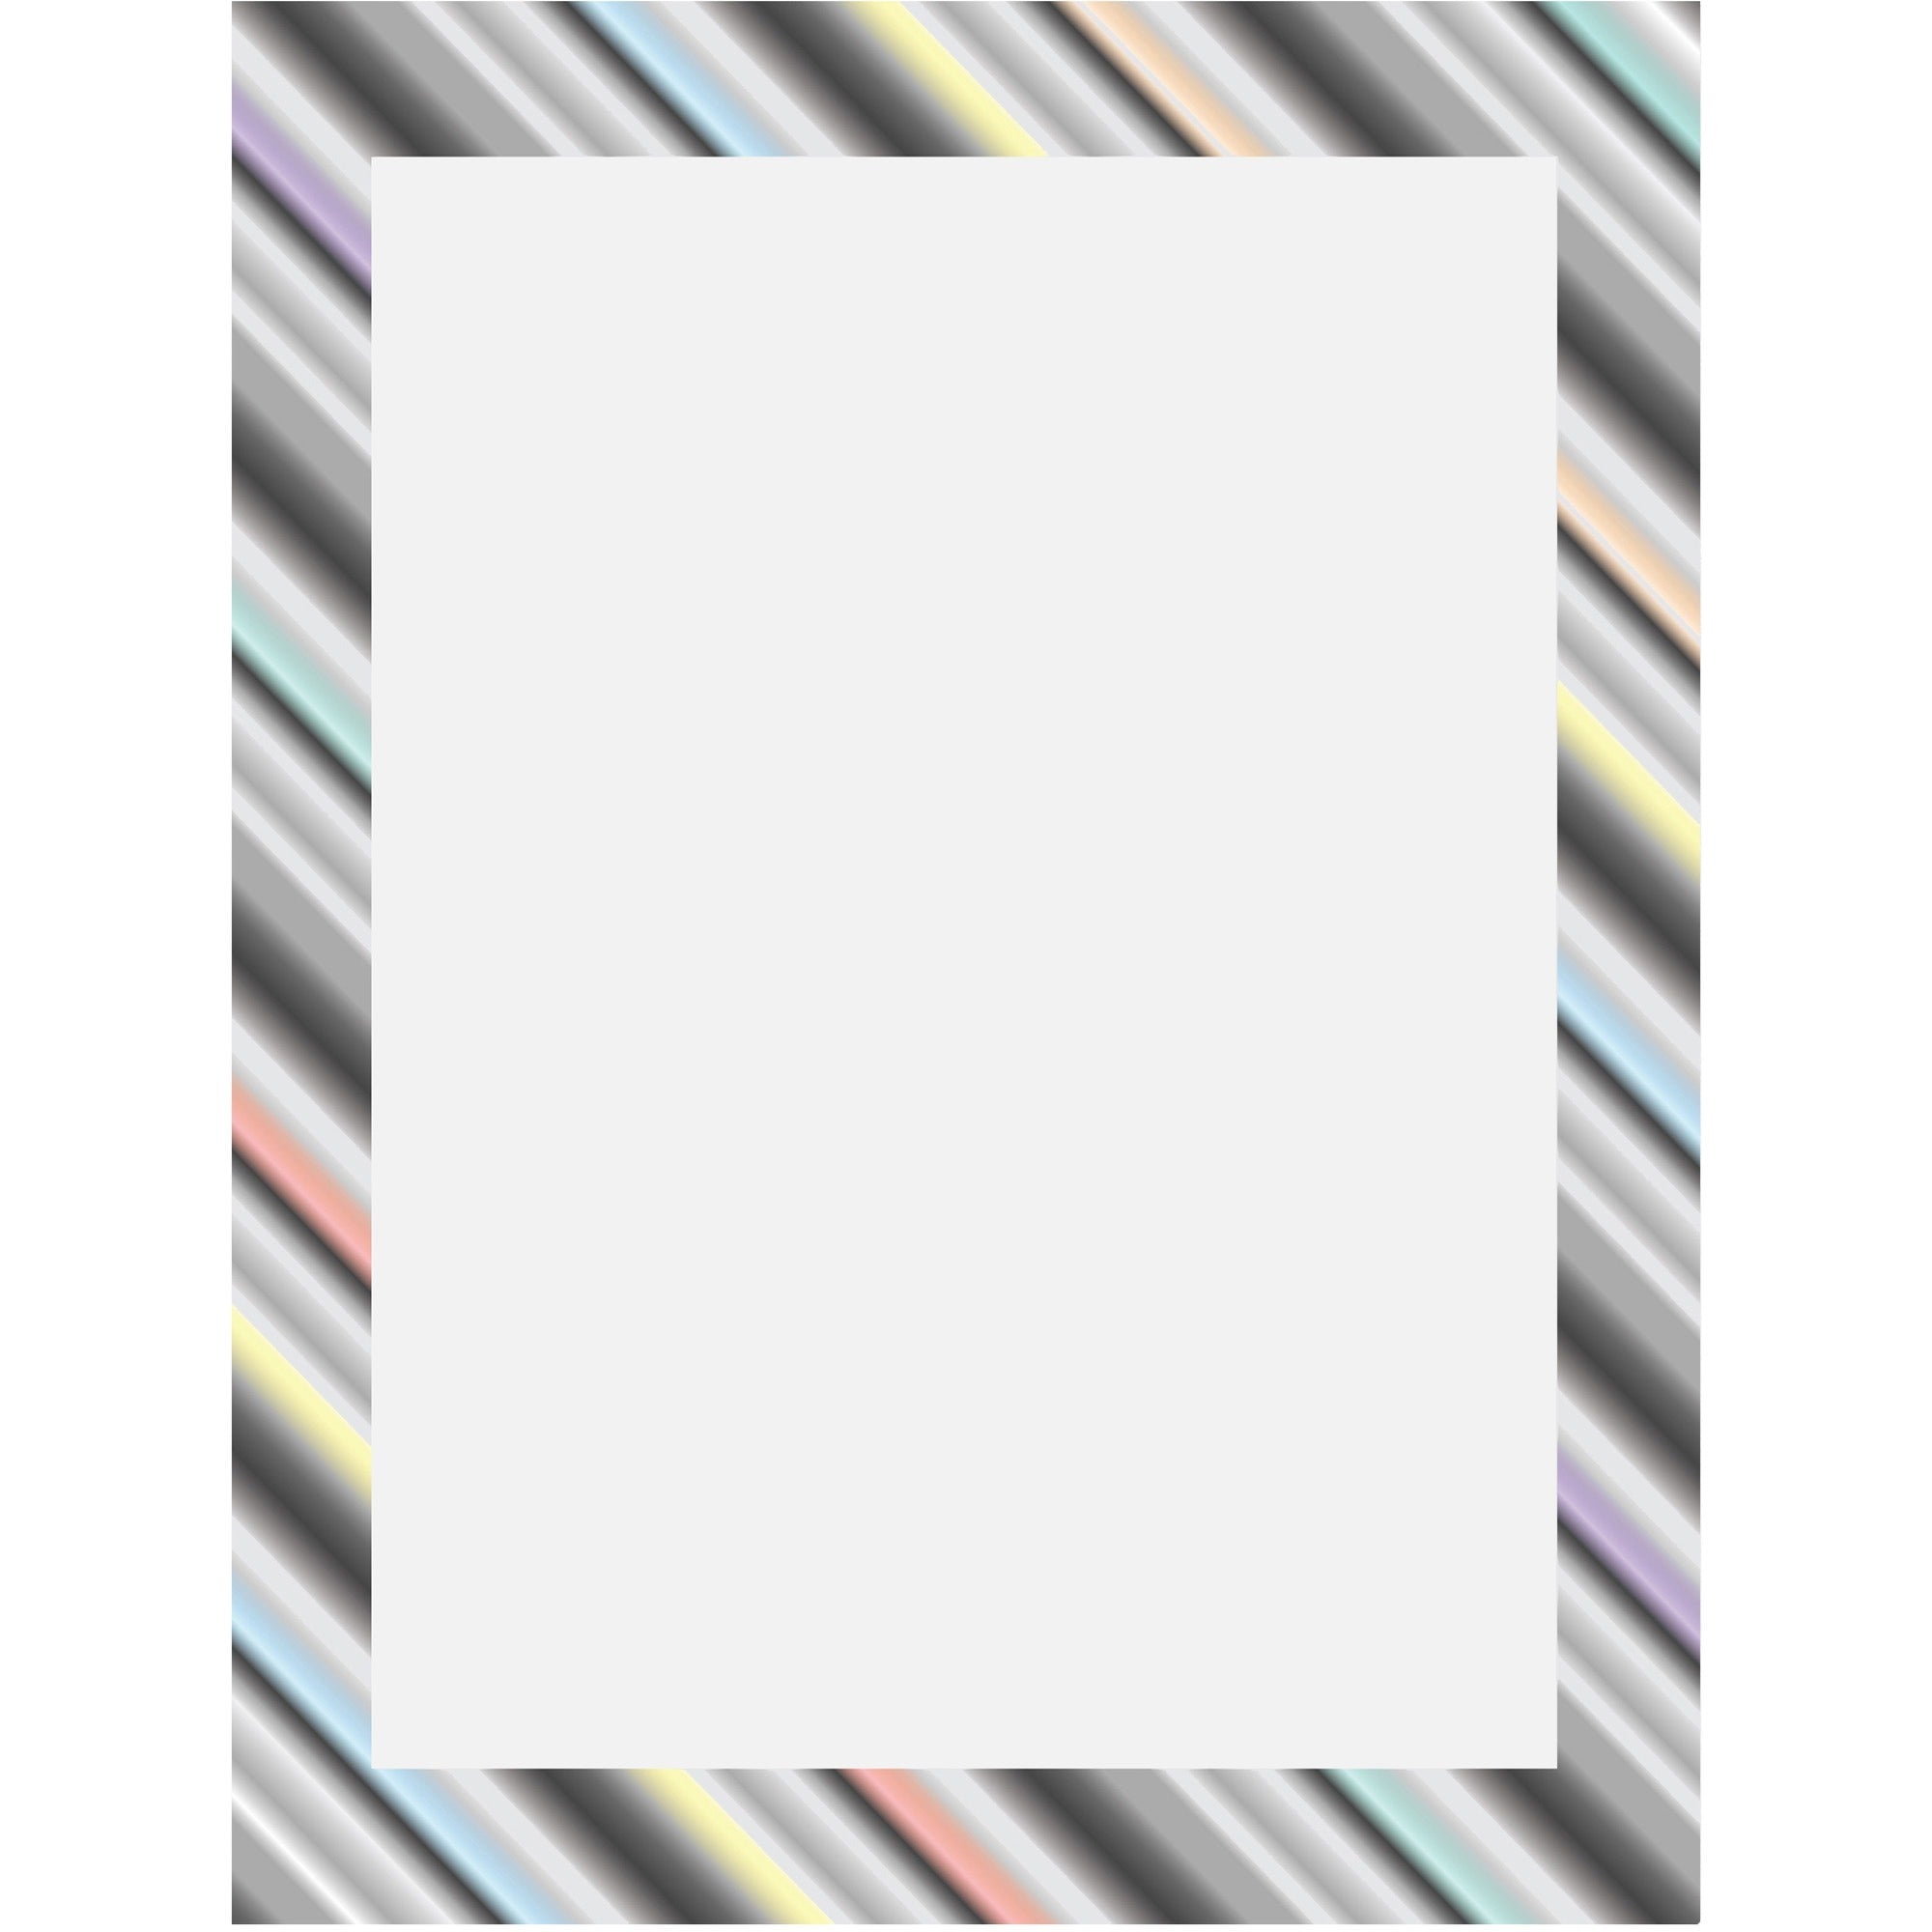 geographics-rainbow-dazzle-design-poster-board-fun-and-learning-project-sign-display-art-28height-x-22width-25-carton-white_geo24758 - 1